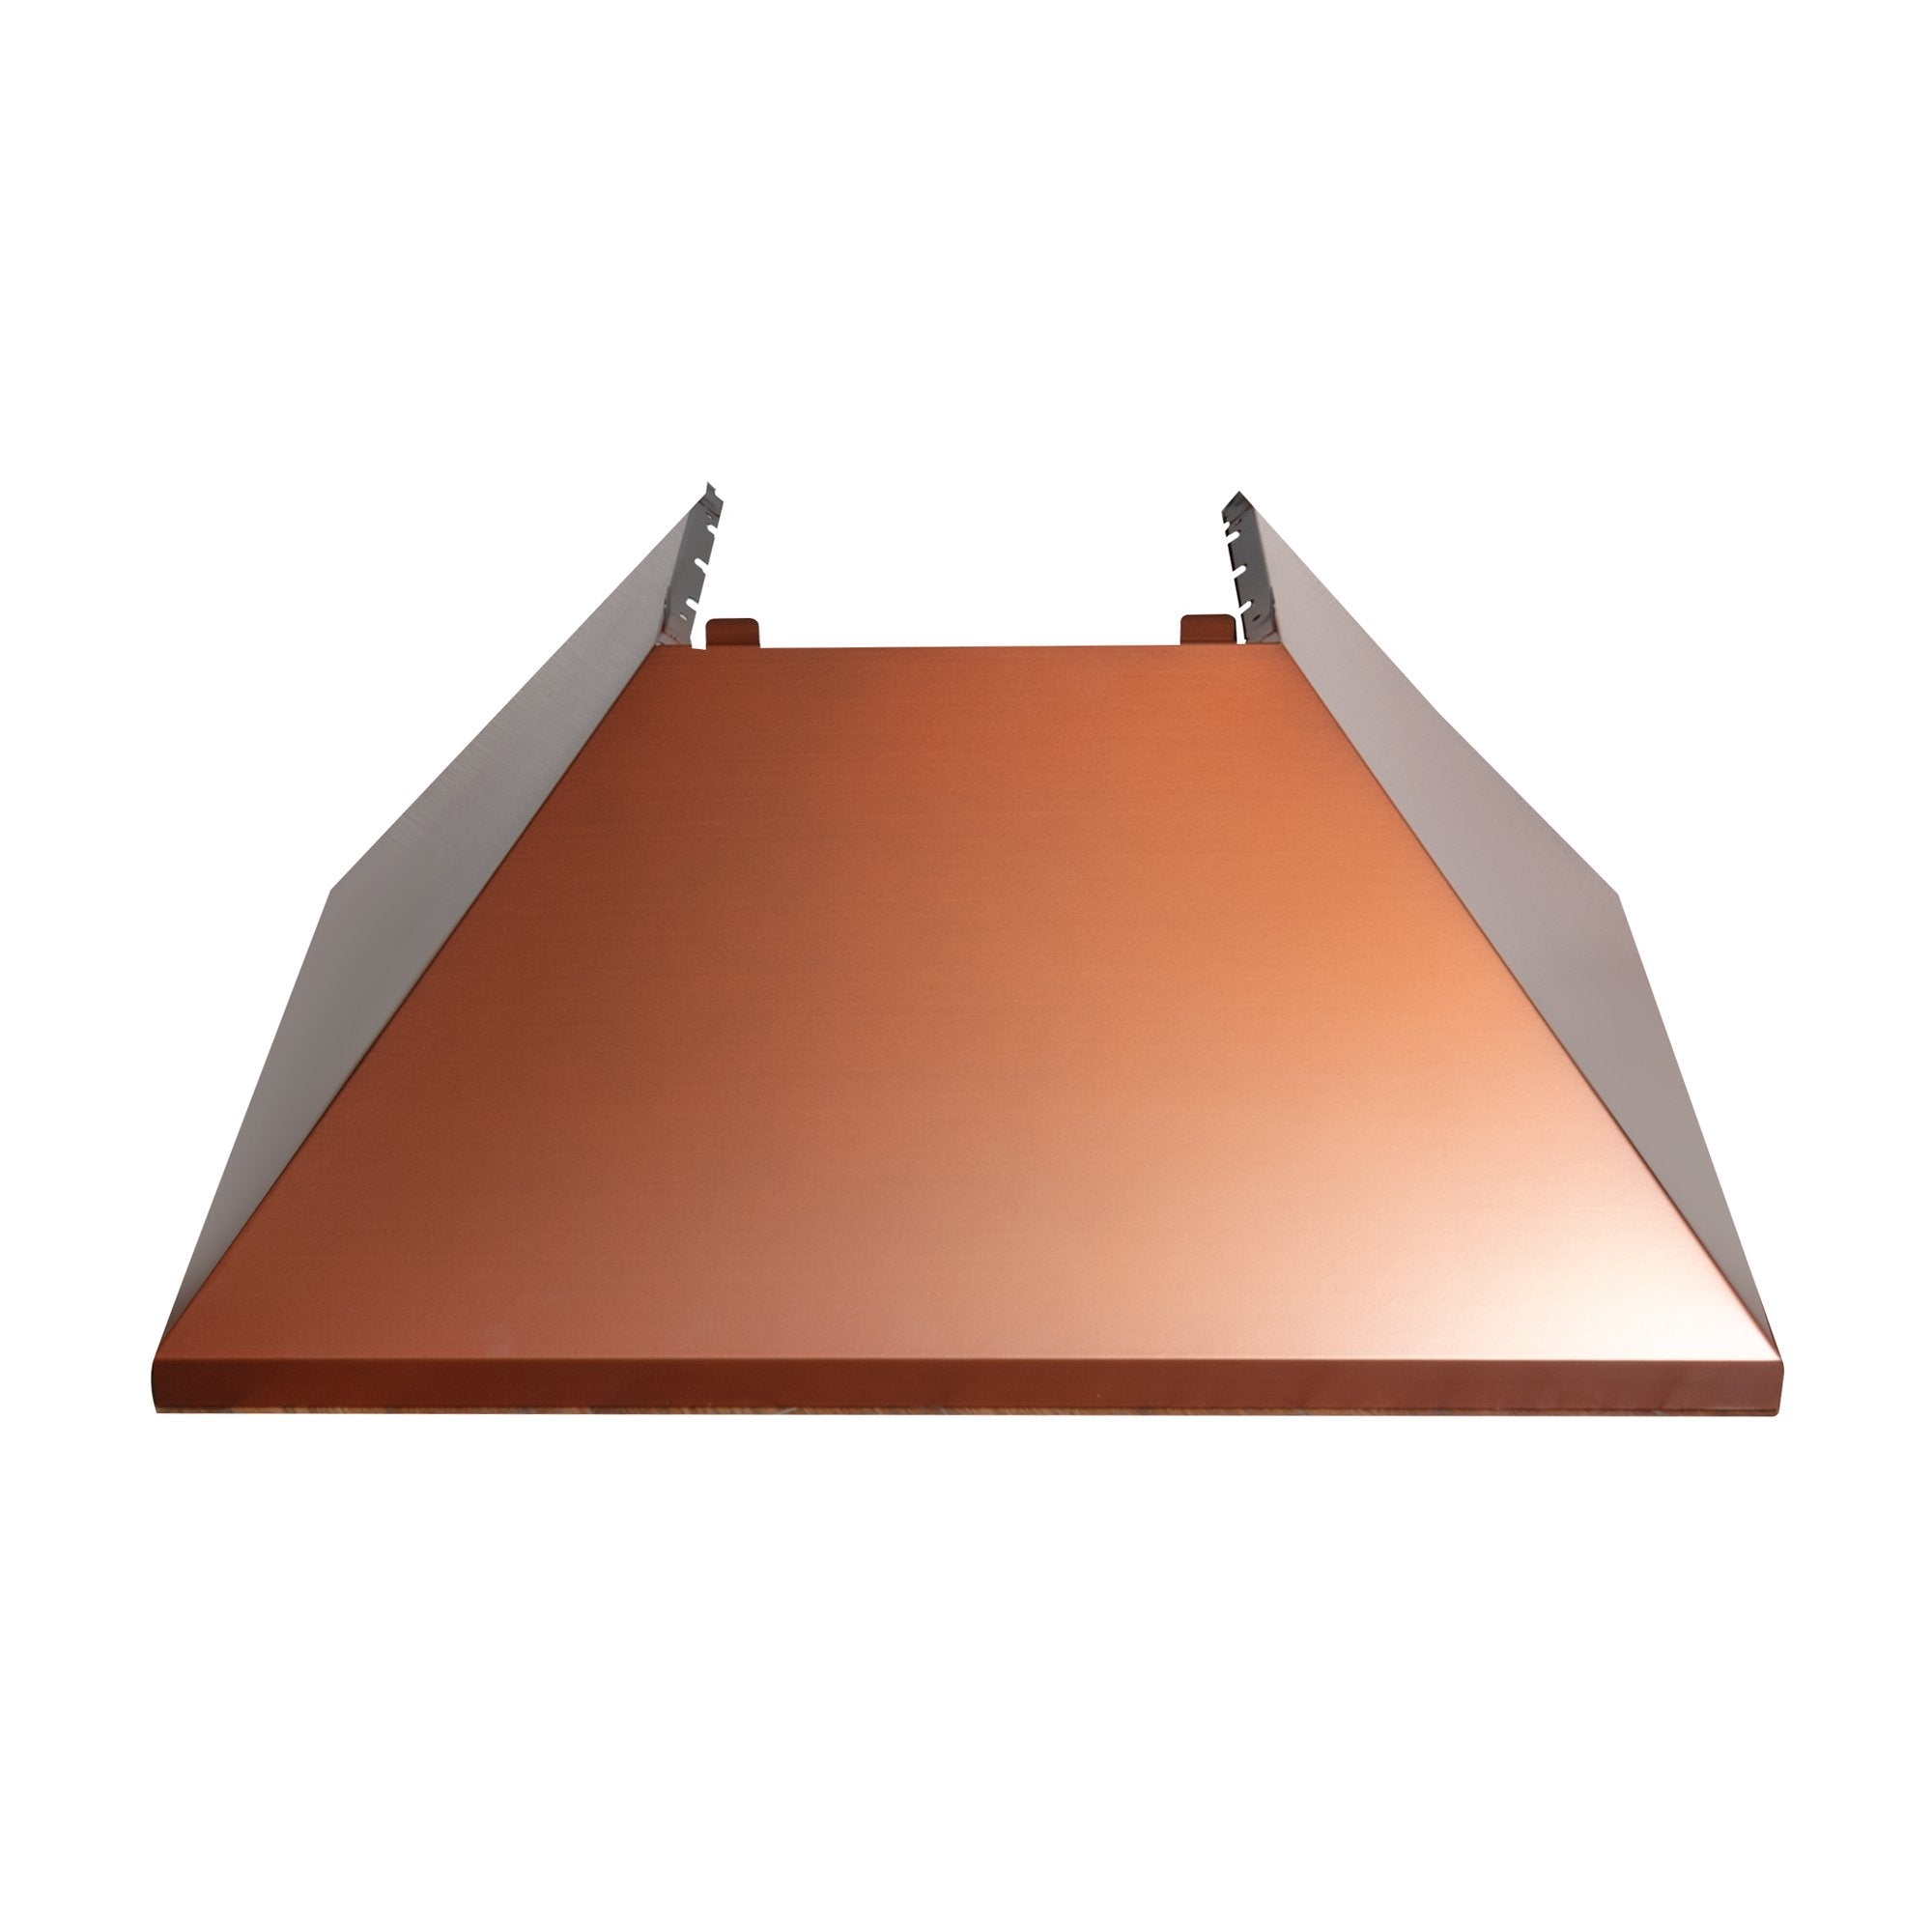 36" Ducted Fingerprint Resistant Stainless Steel Range Hood with Copper Shell (8654C-36)